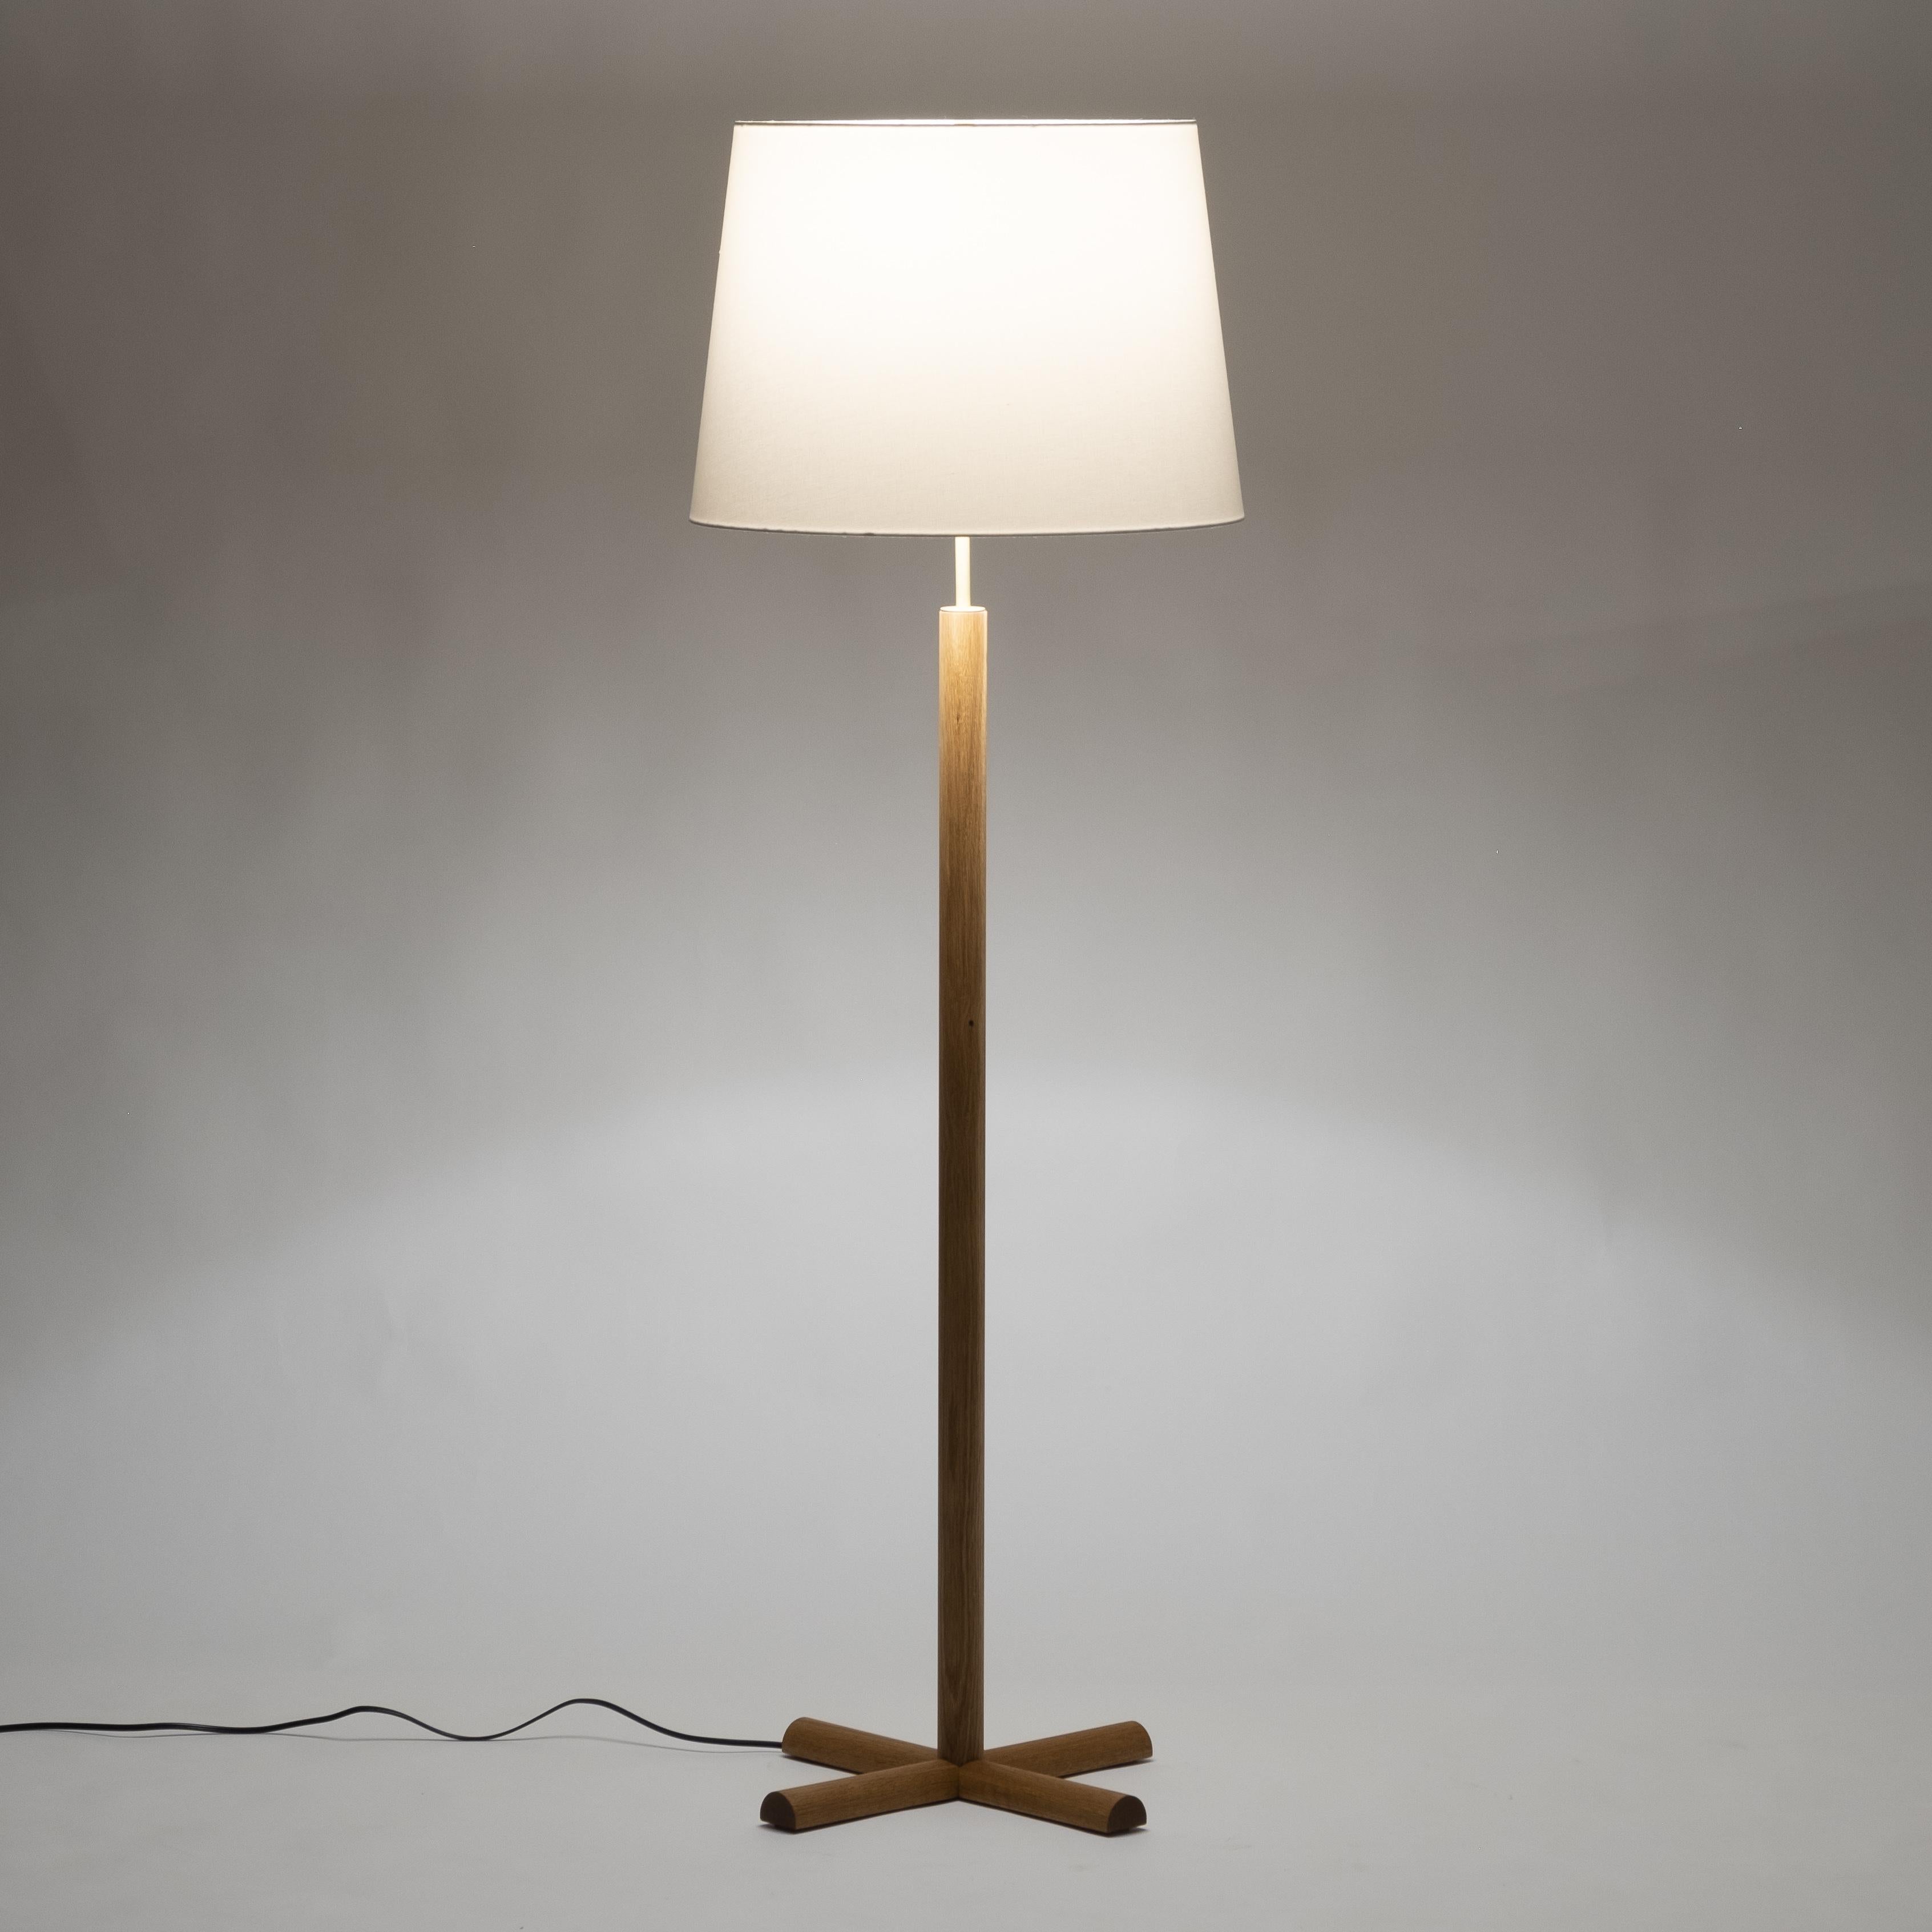 Turned Modern Floor Lamp with White Oak Column Base and Conical Shade For Sale